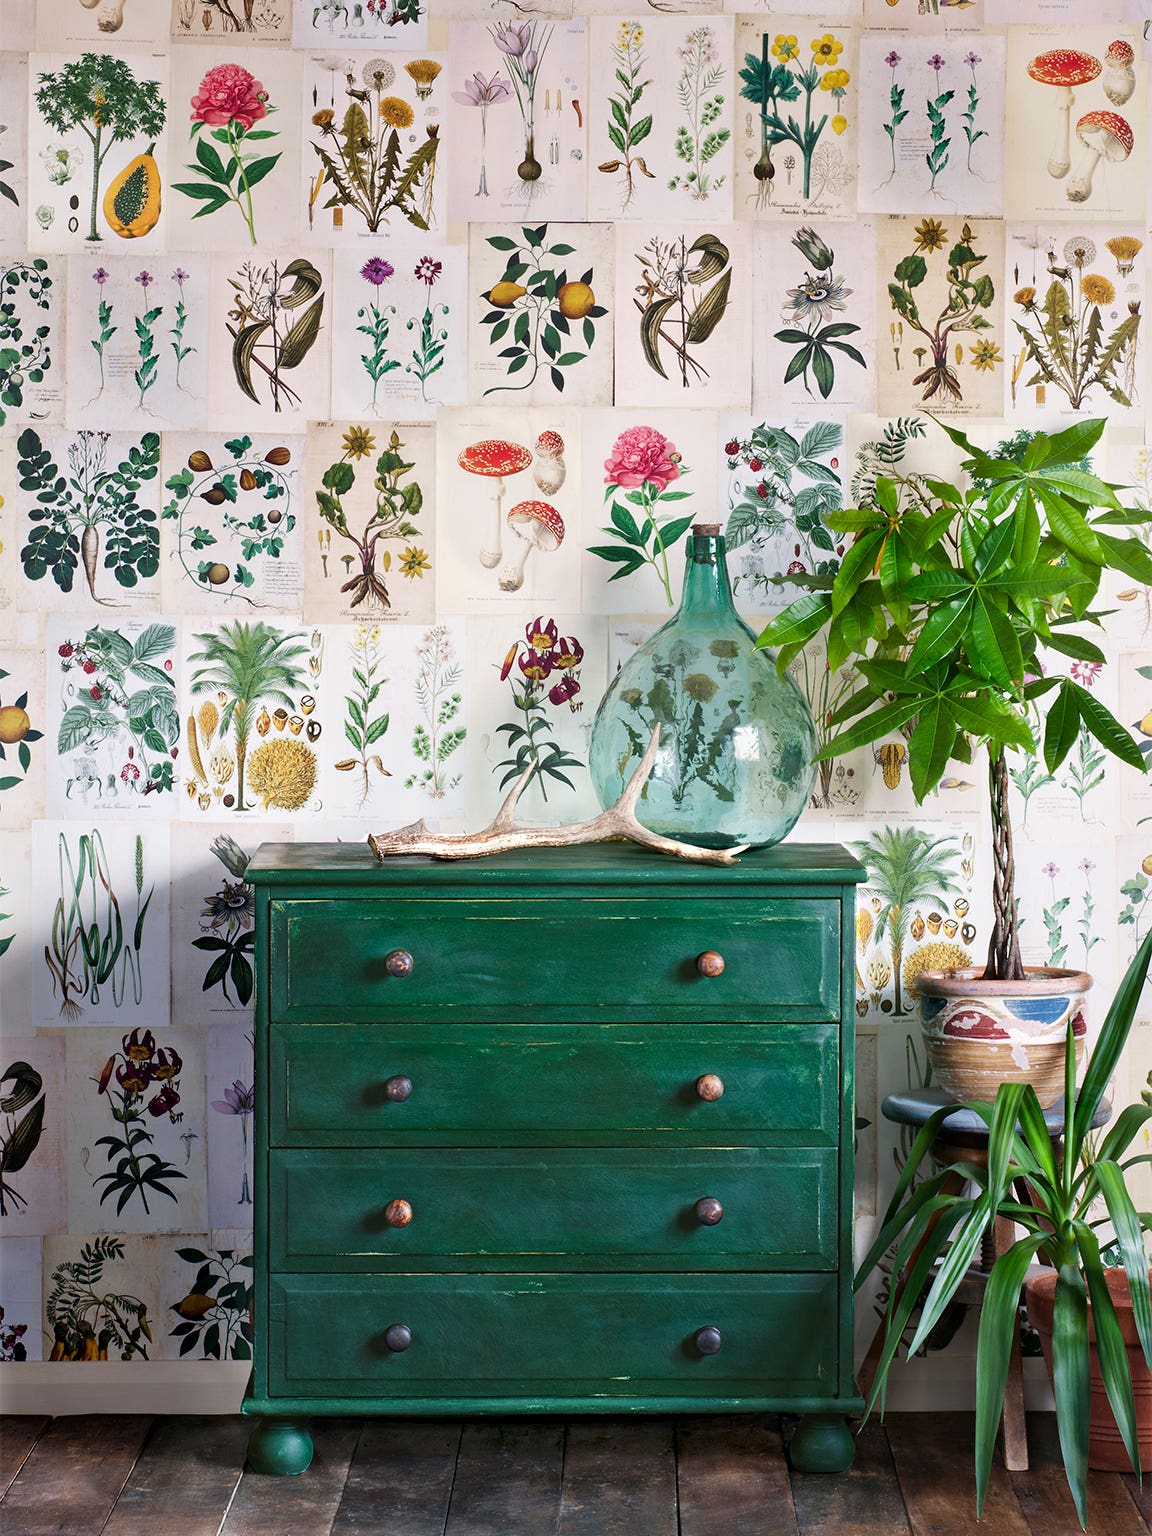 green dresser and plants in front of floral-print wallpaper